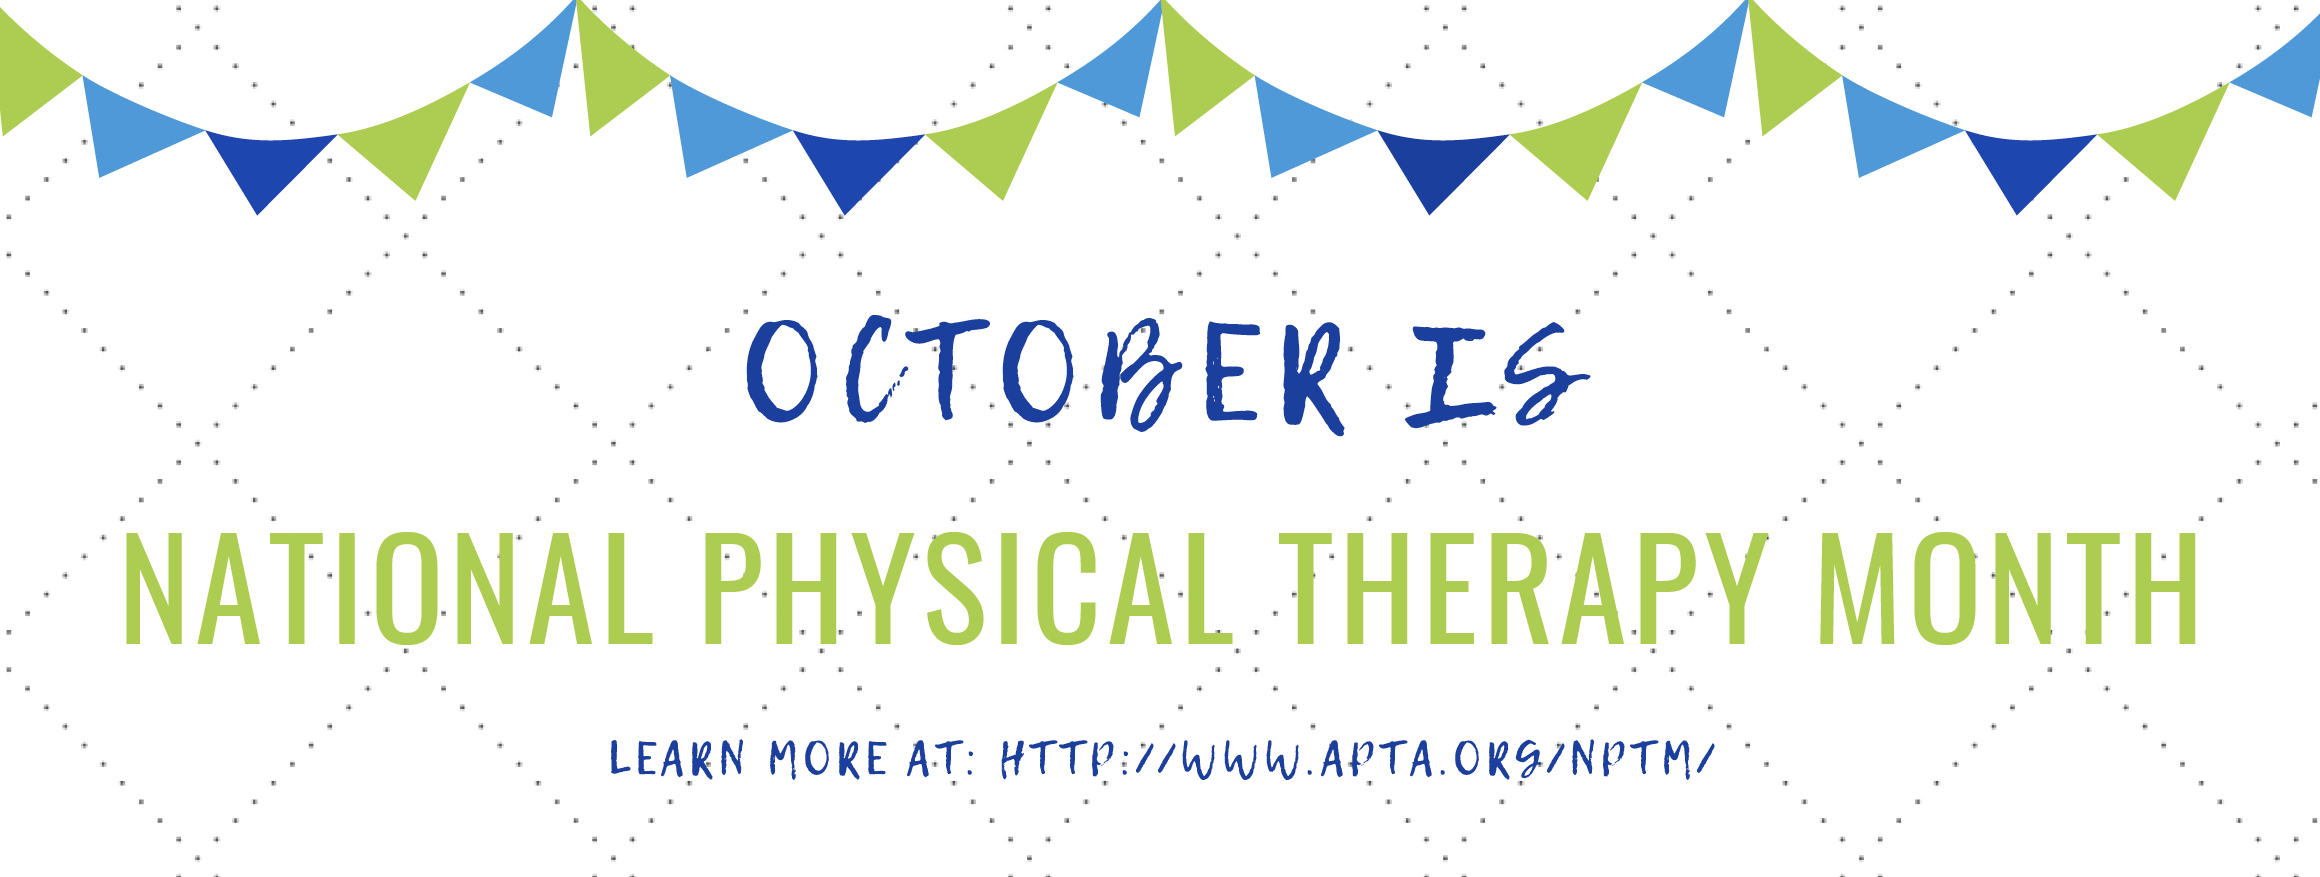 National Physical Therapy Month Logo - National Physical Therapy Month | Best Physical & Orthopedic Therapy ...